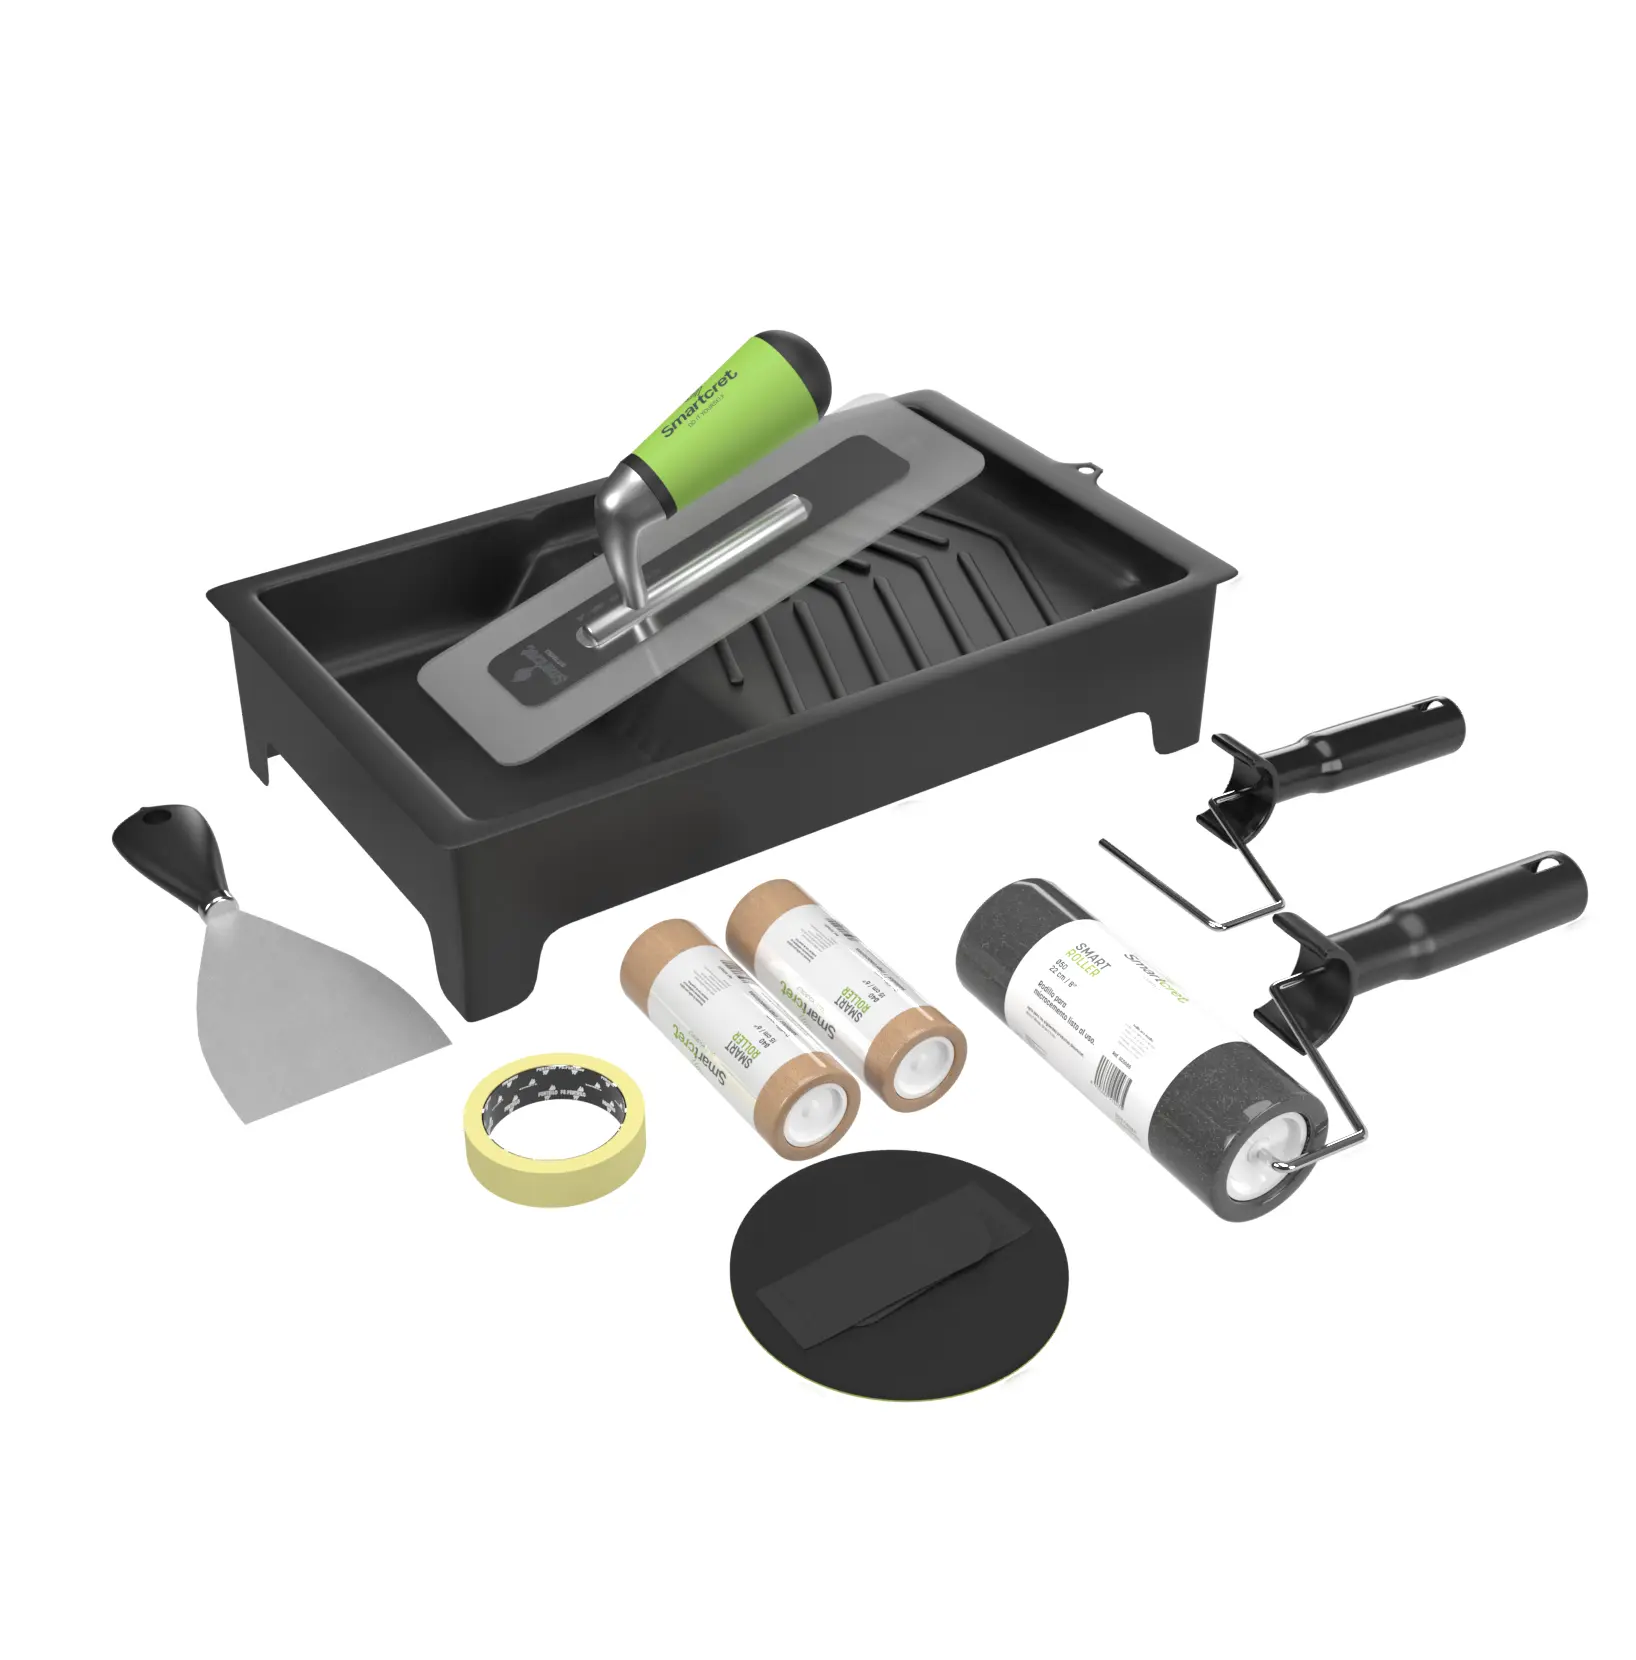 Tools Kit to apply microcement